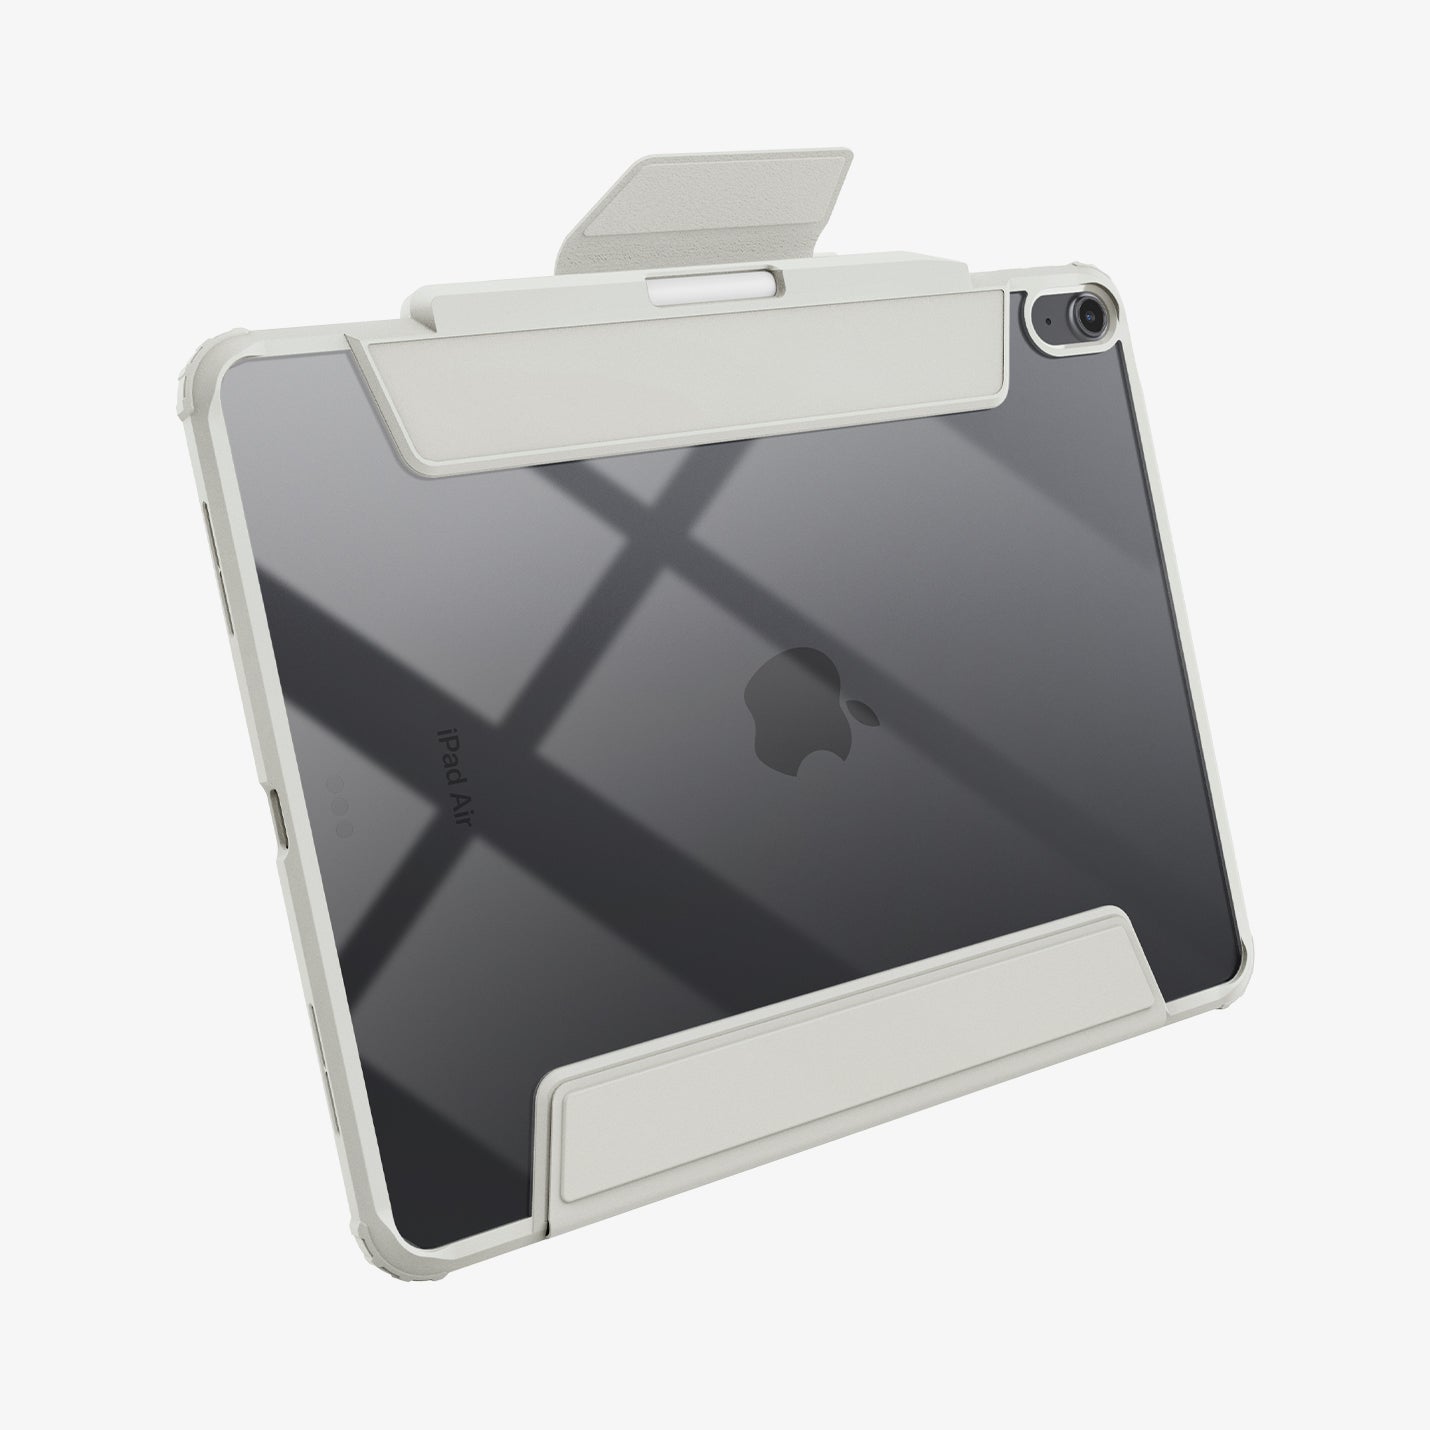 ACS07677 - iPad Air 12.9-inch Case Air Skin Pro in Gray showing the back and partial bottom with cover flap open